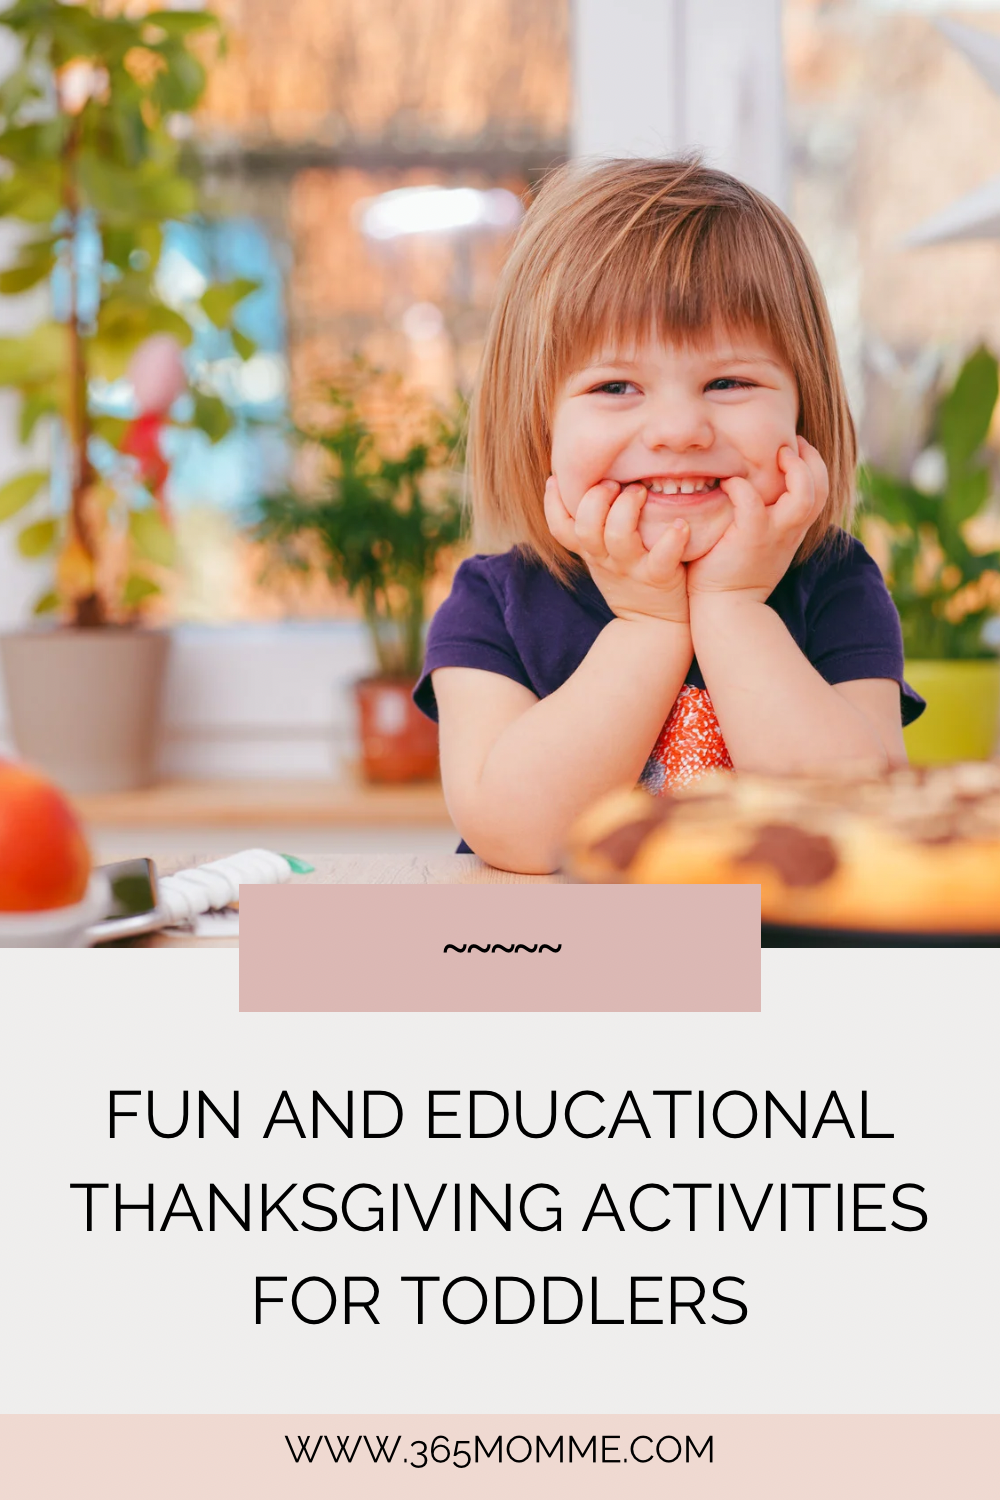 Fun and Educational Thanksgiving Activities for Toddlers